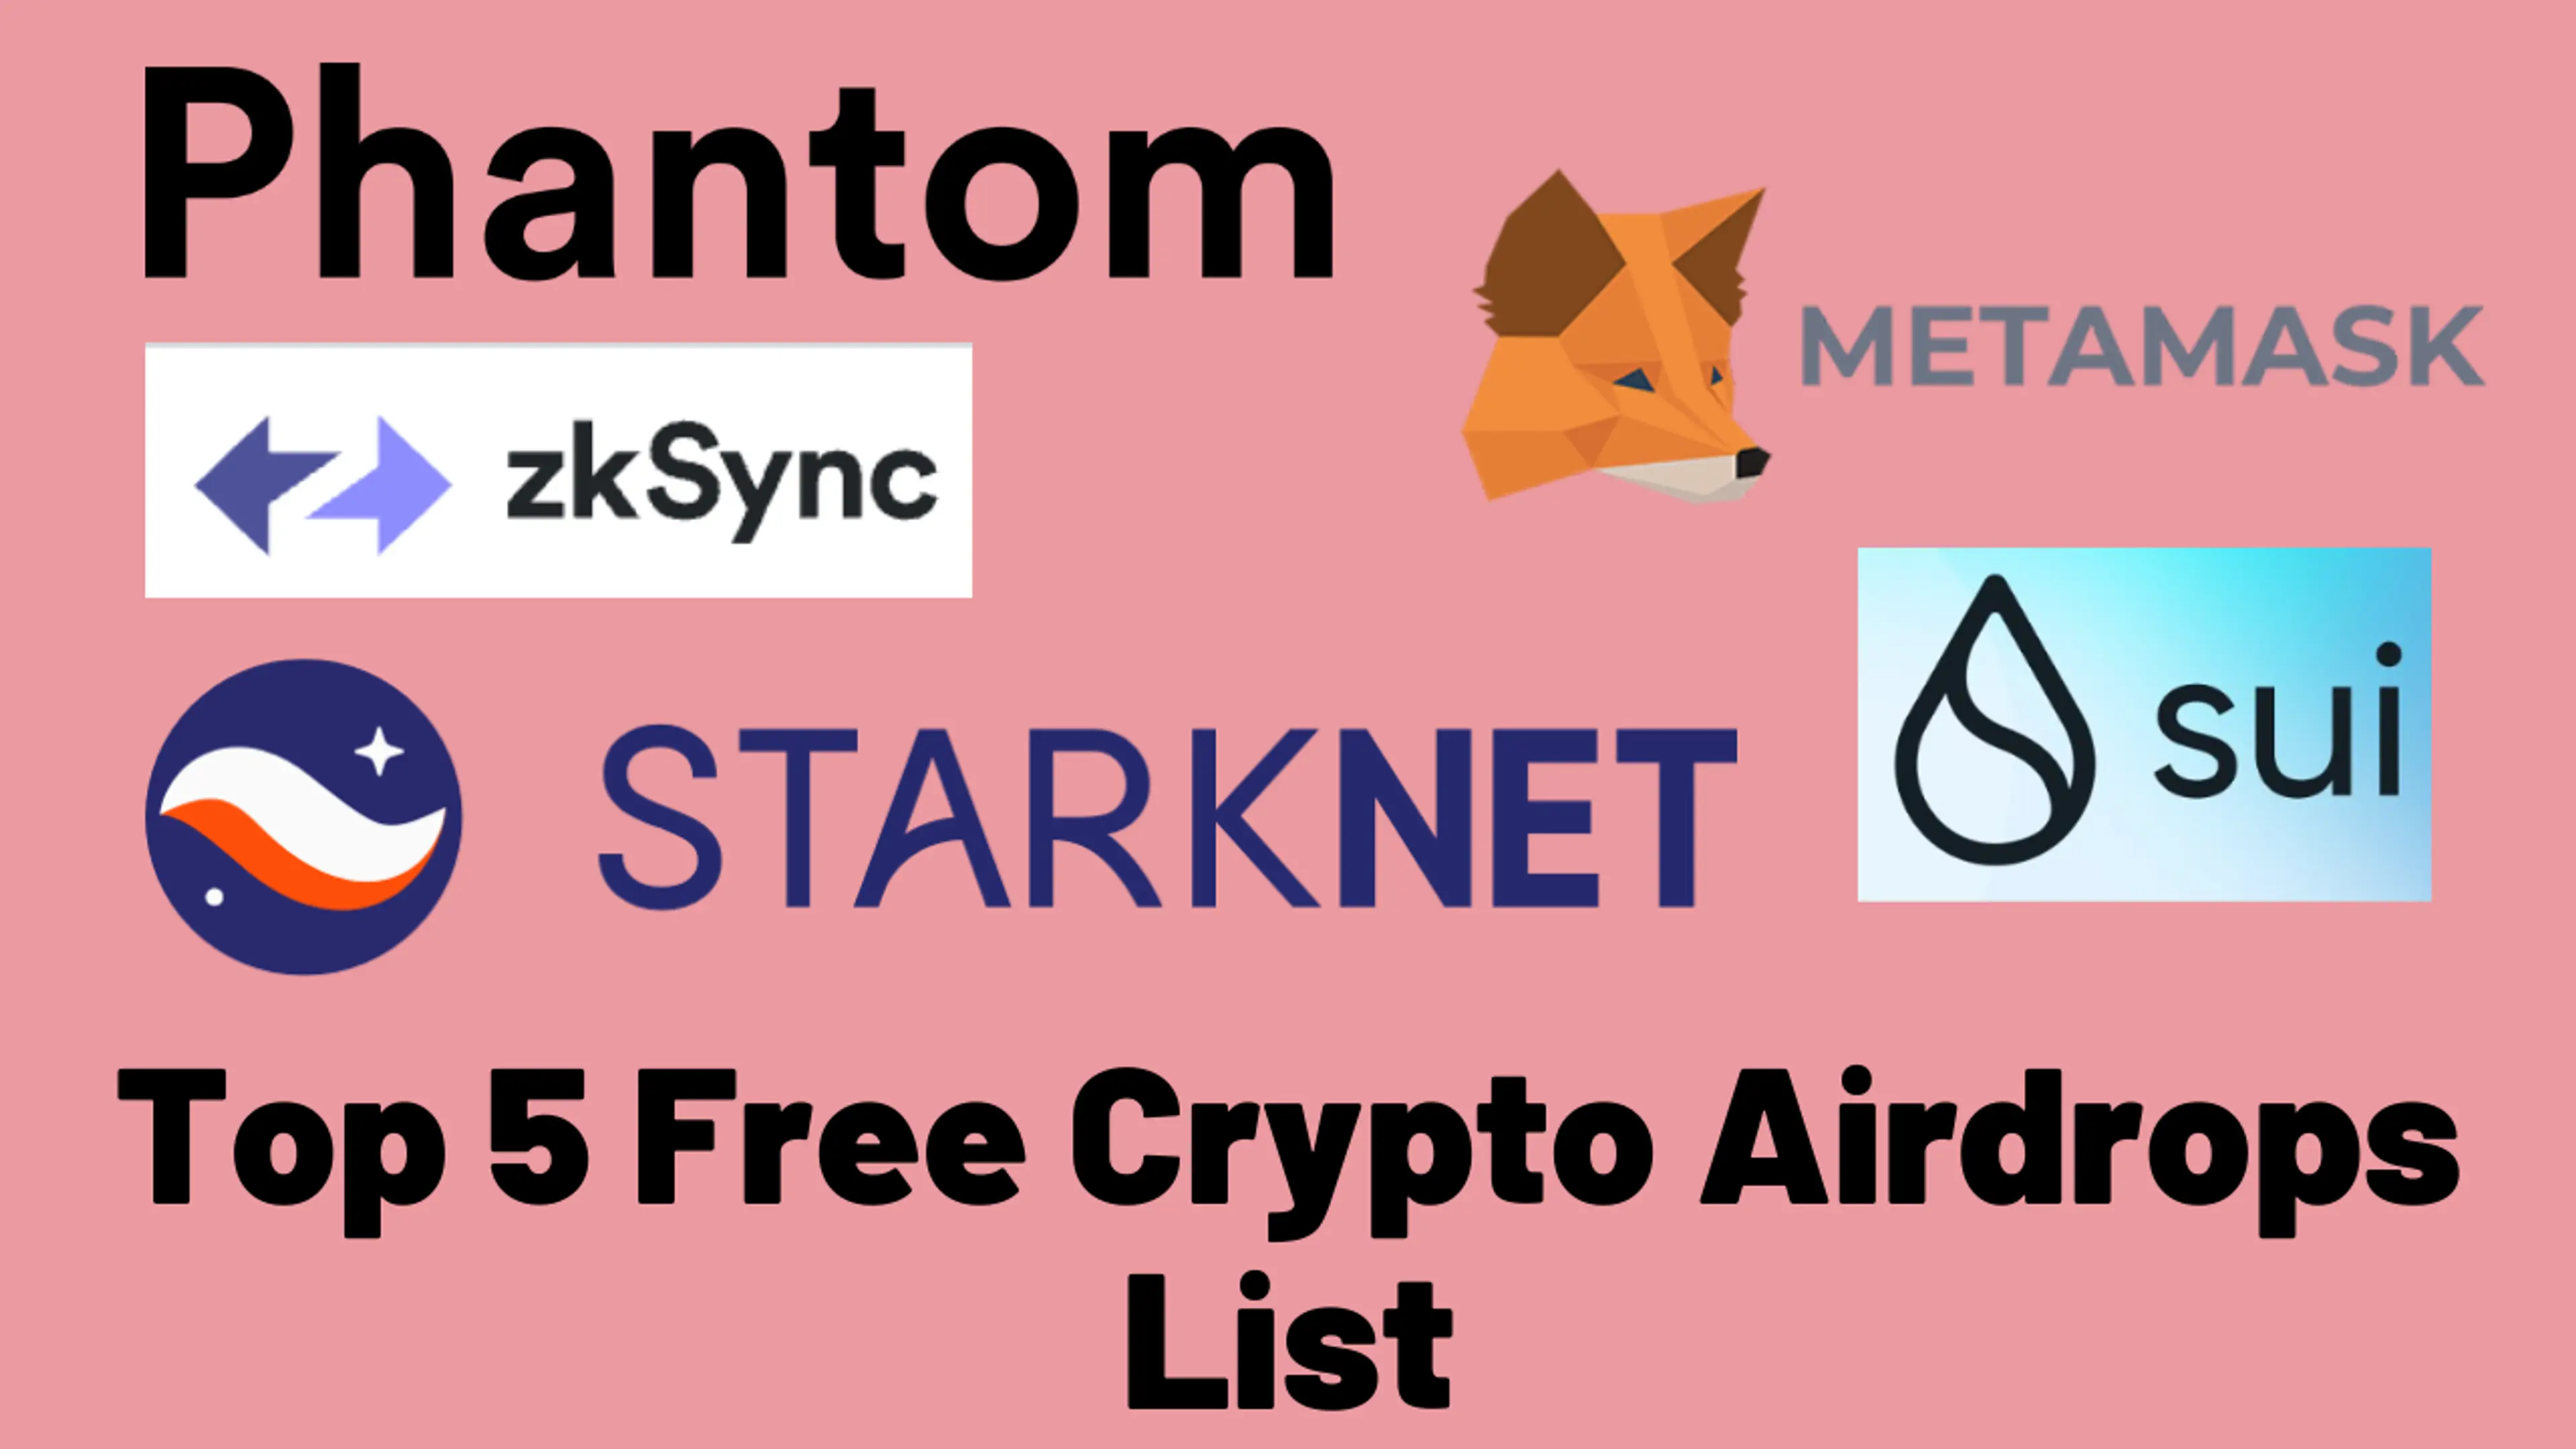 Top 5 Free Crypto Airdrops List.png